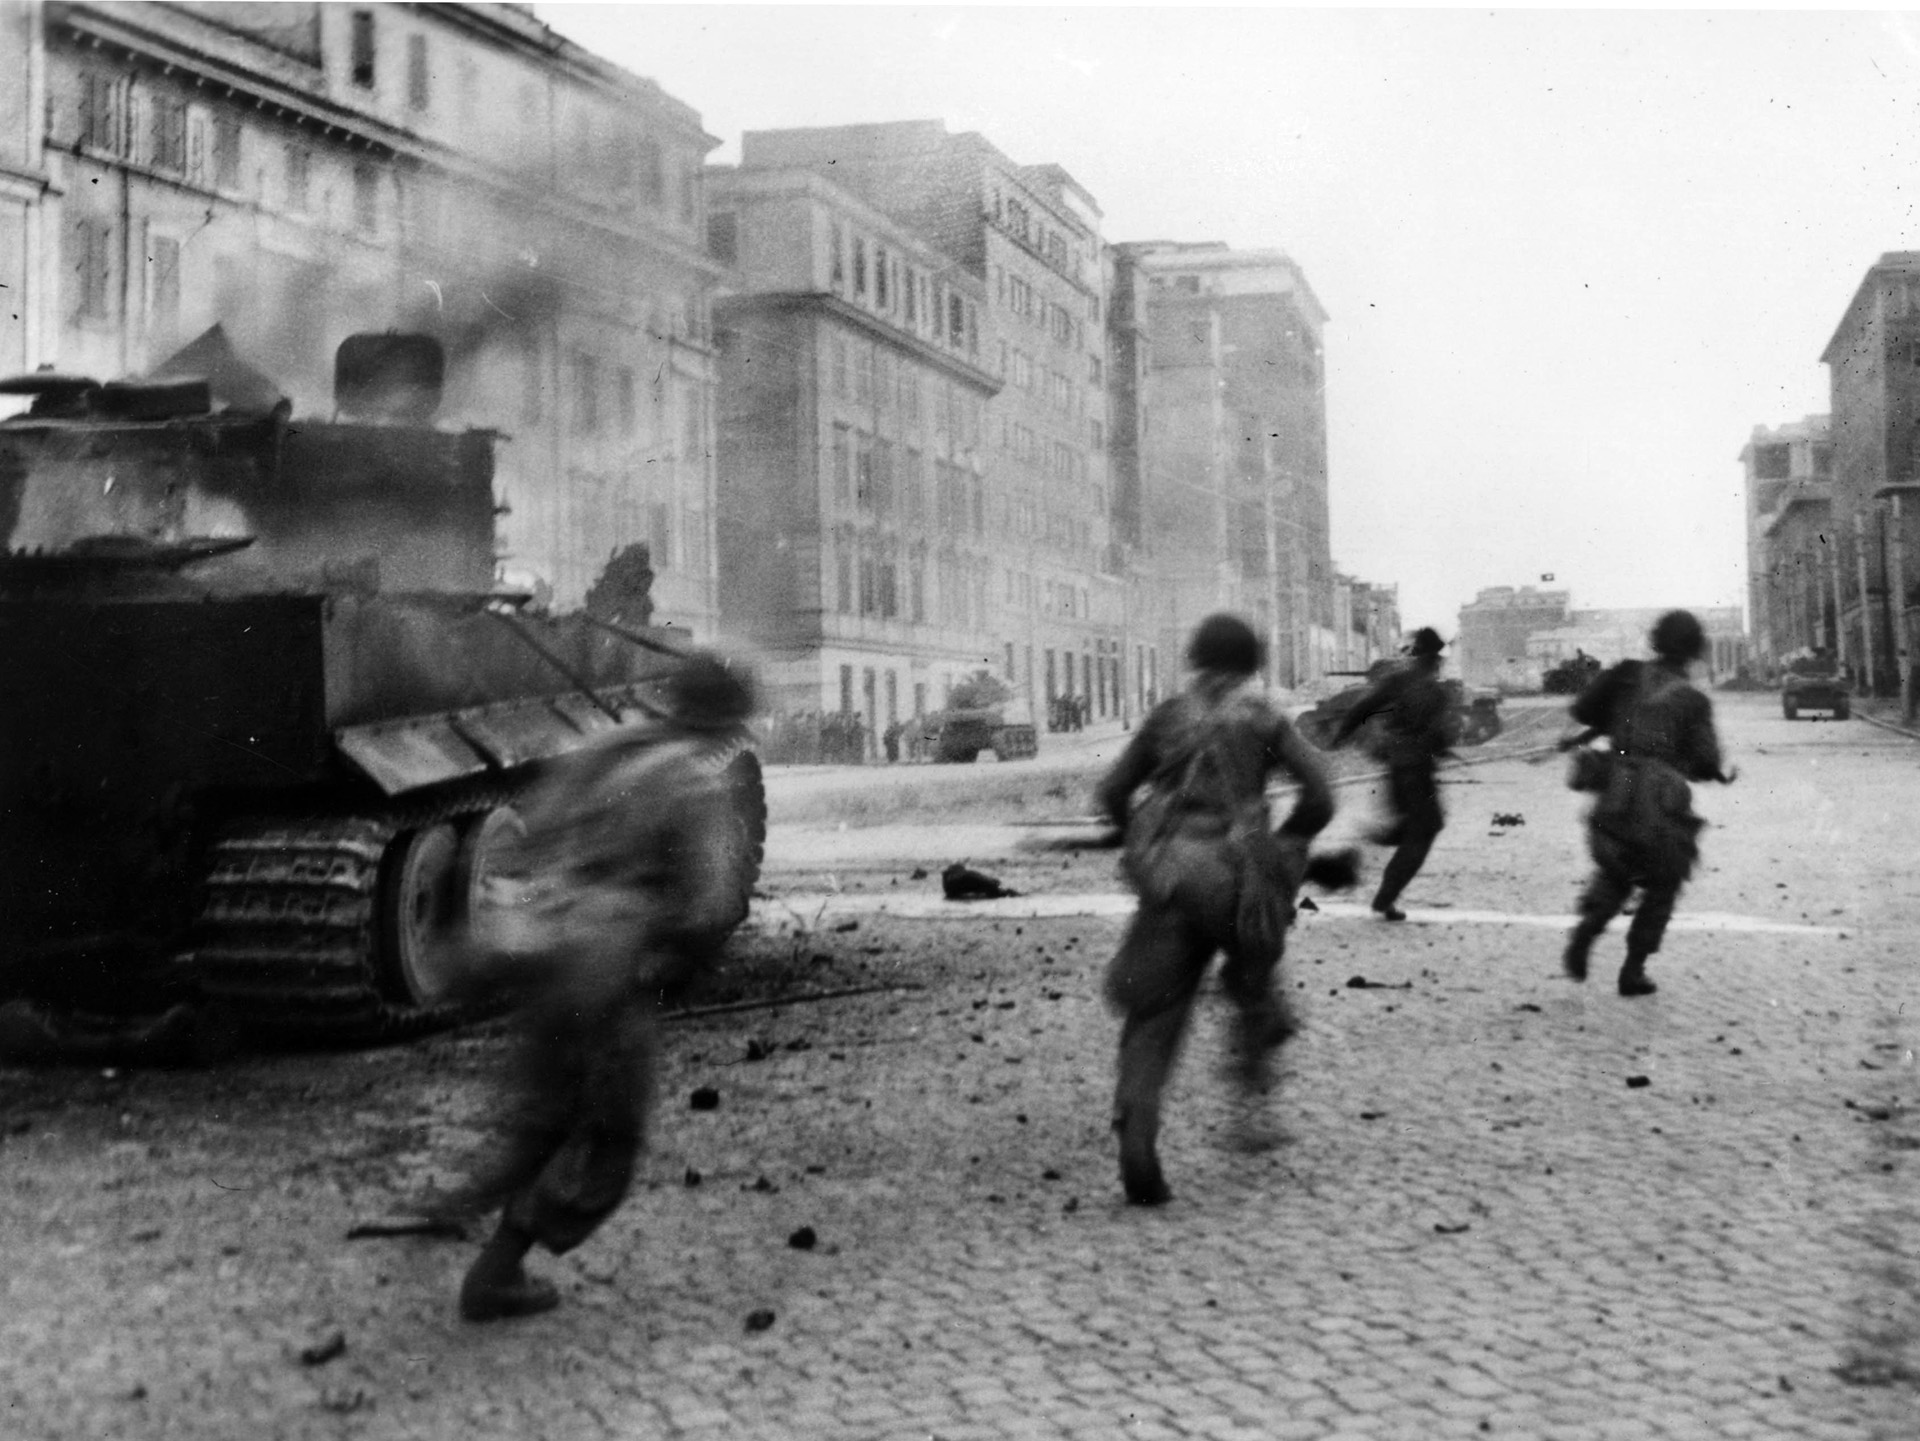 By early June 1944, American troops were fighting on the outskirts of the Eternal City. In this photo American soldiers rush past the smoking hulk of a knocked-out German tank sitting on a street in the Italian capital. By then Kesserling had moved his forces north again.